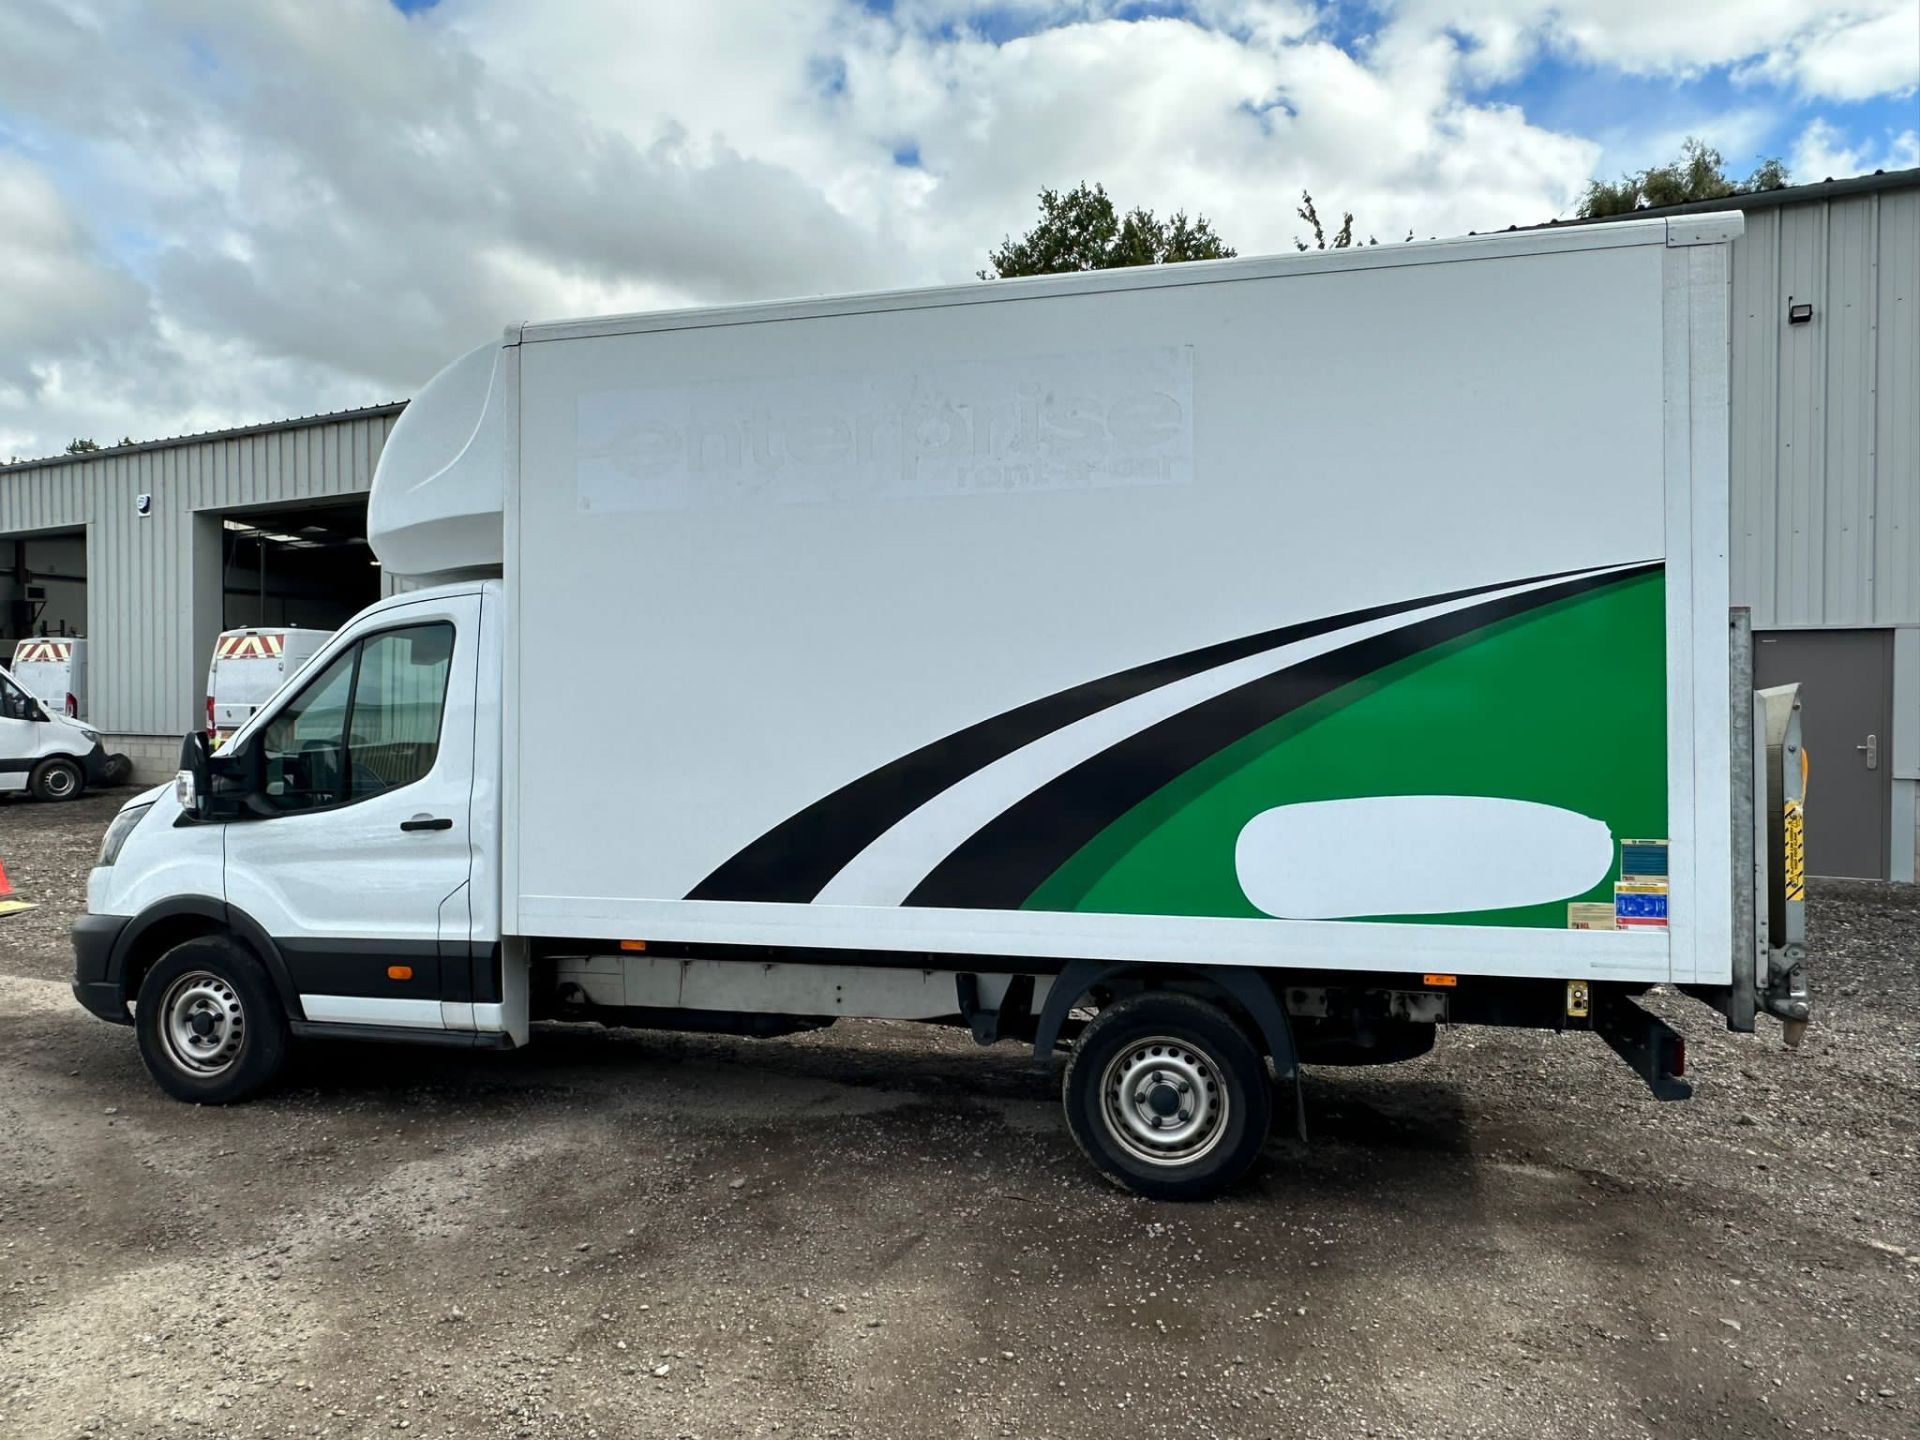 2021 21 ford Transit Luton - 47k miles - Lwb - Ideal recovery truck conversion - Image 4 of 8